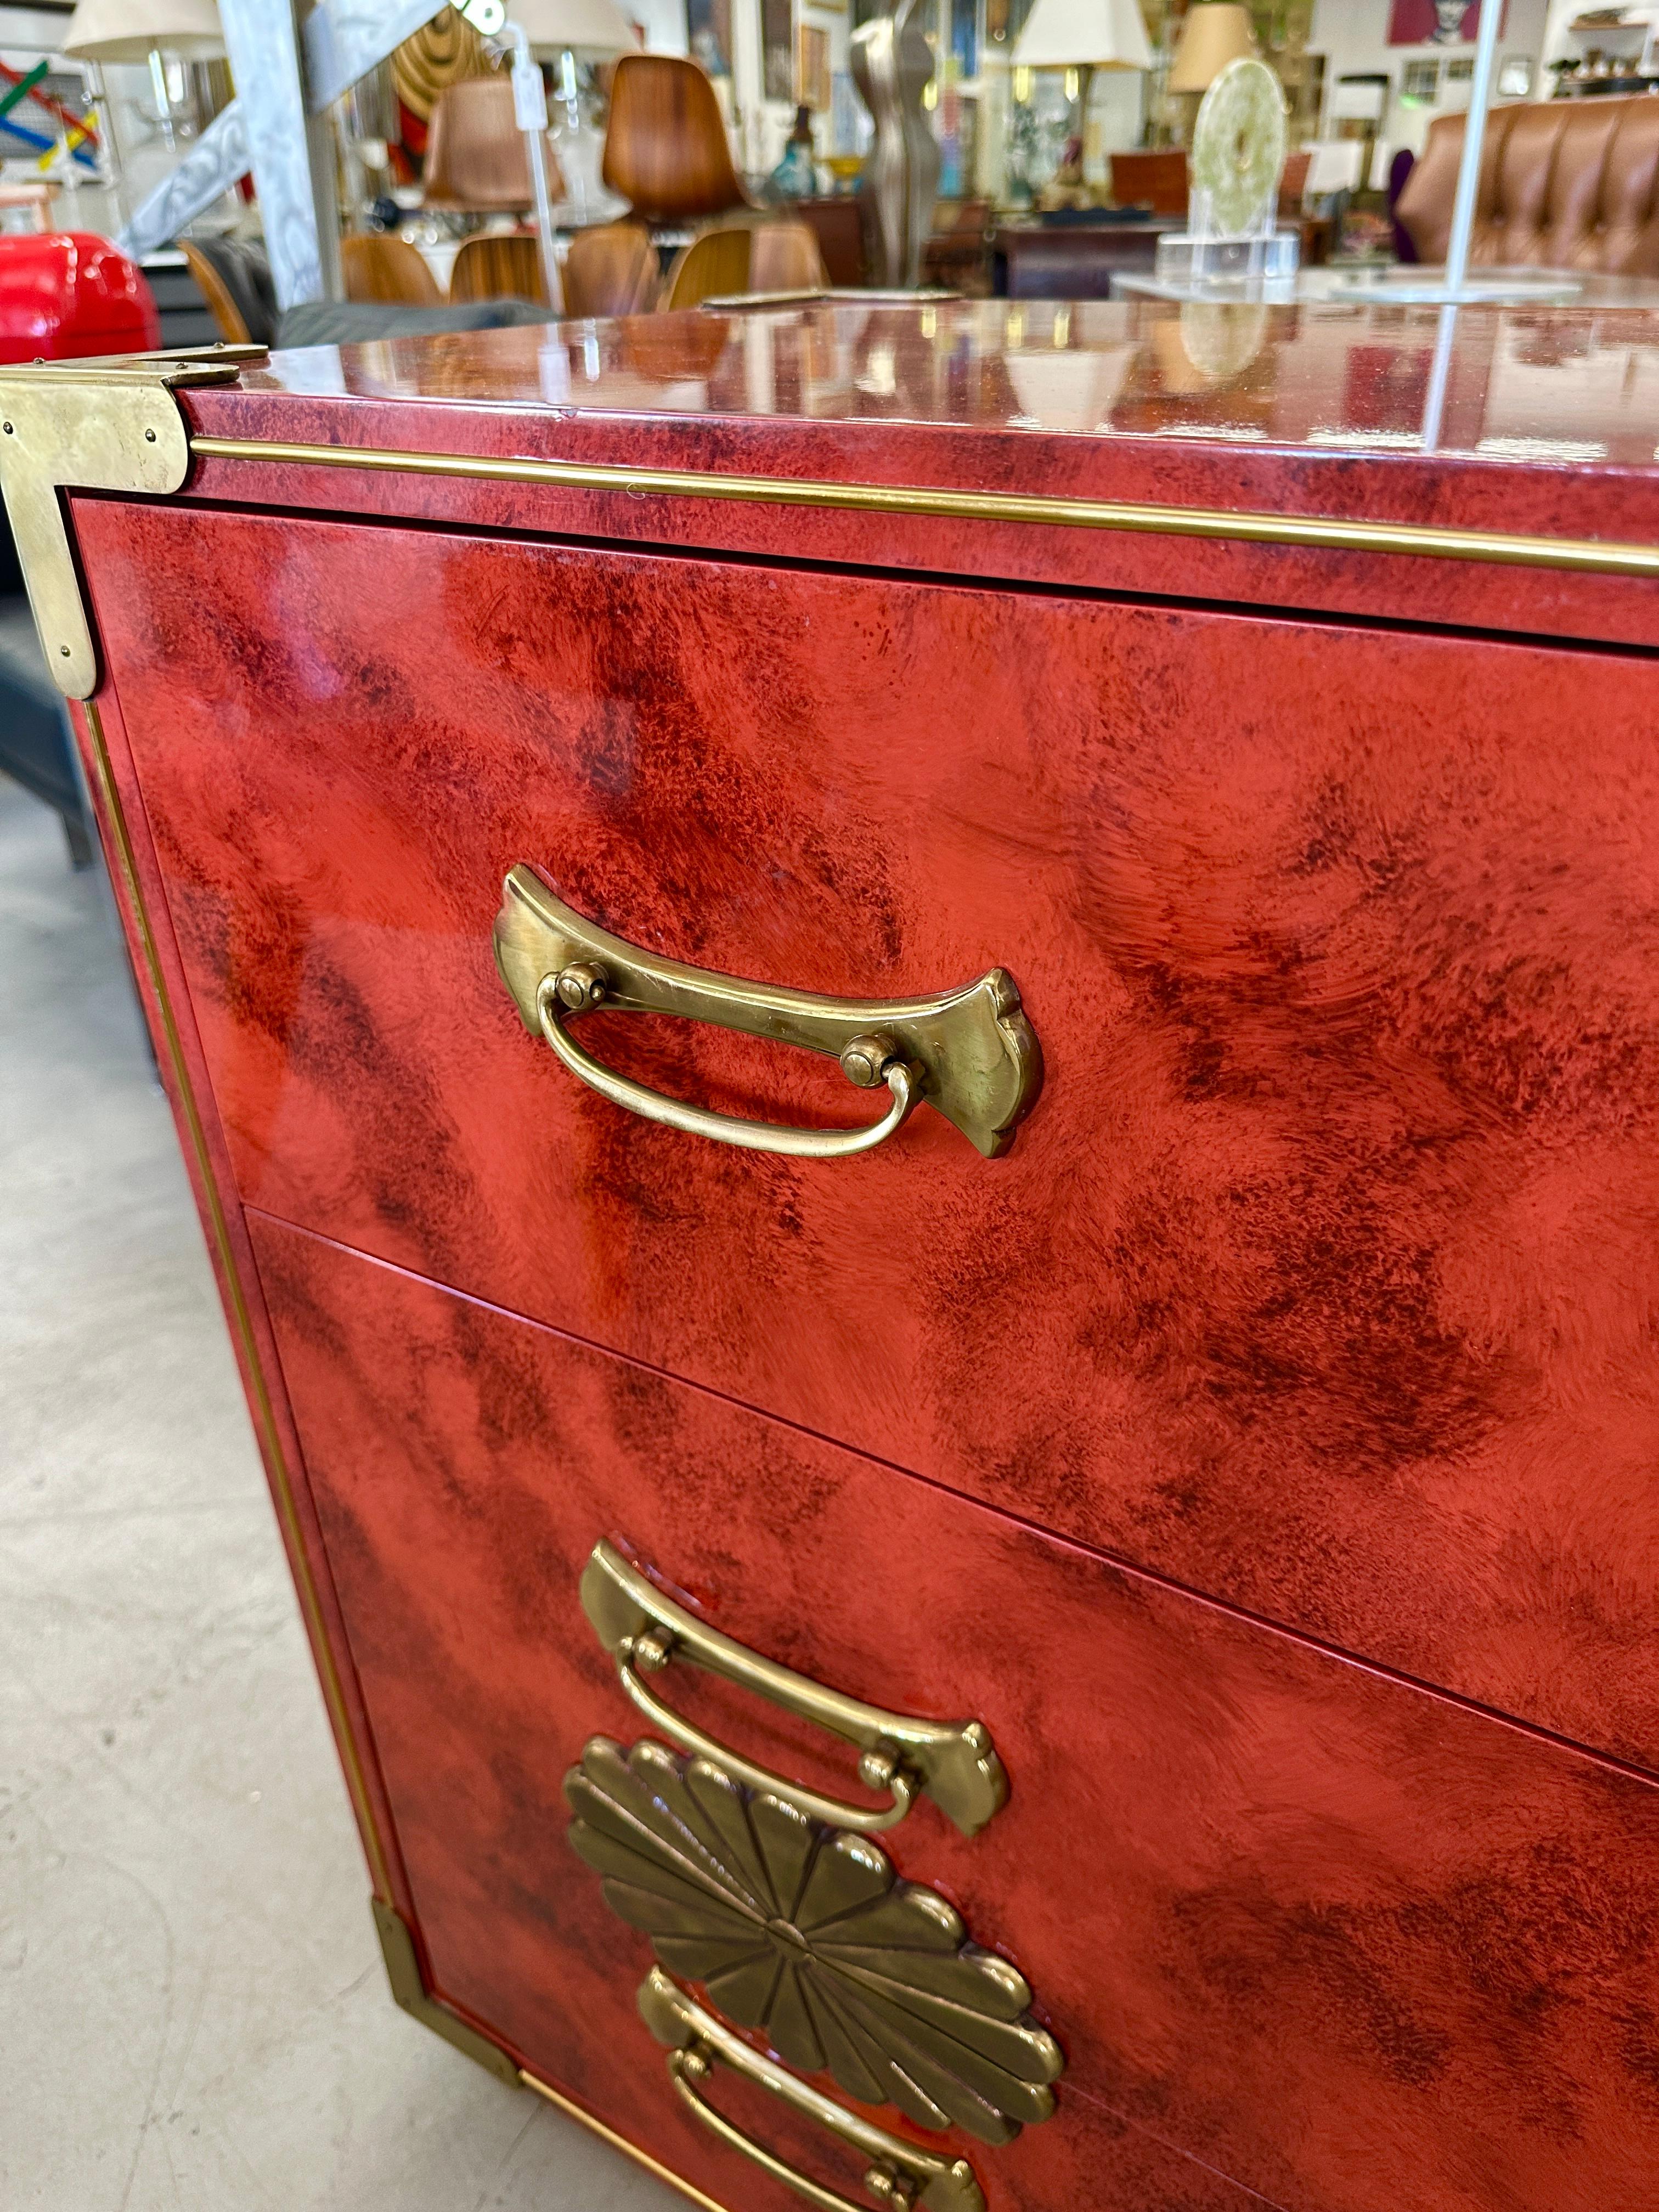 Stunning Coral Red Lacquer & Brass Mastercraft Asian Chest For Sale 6